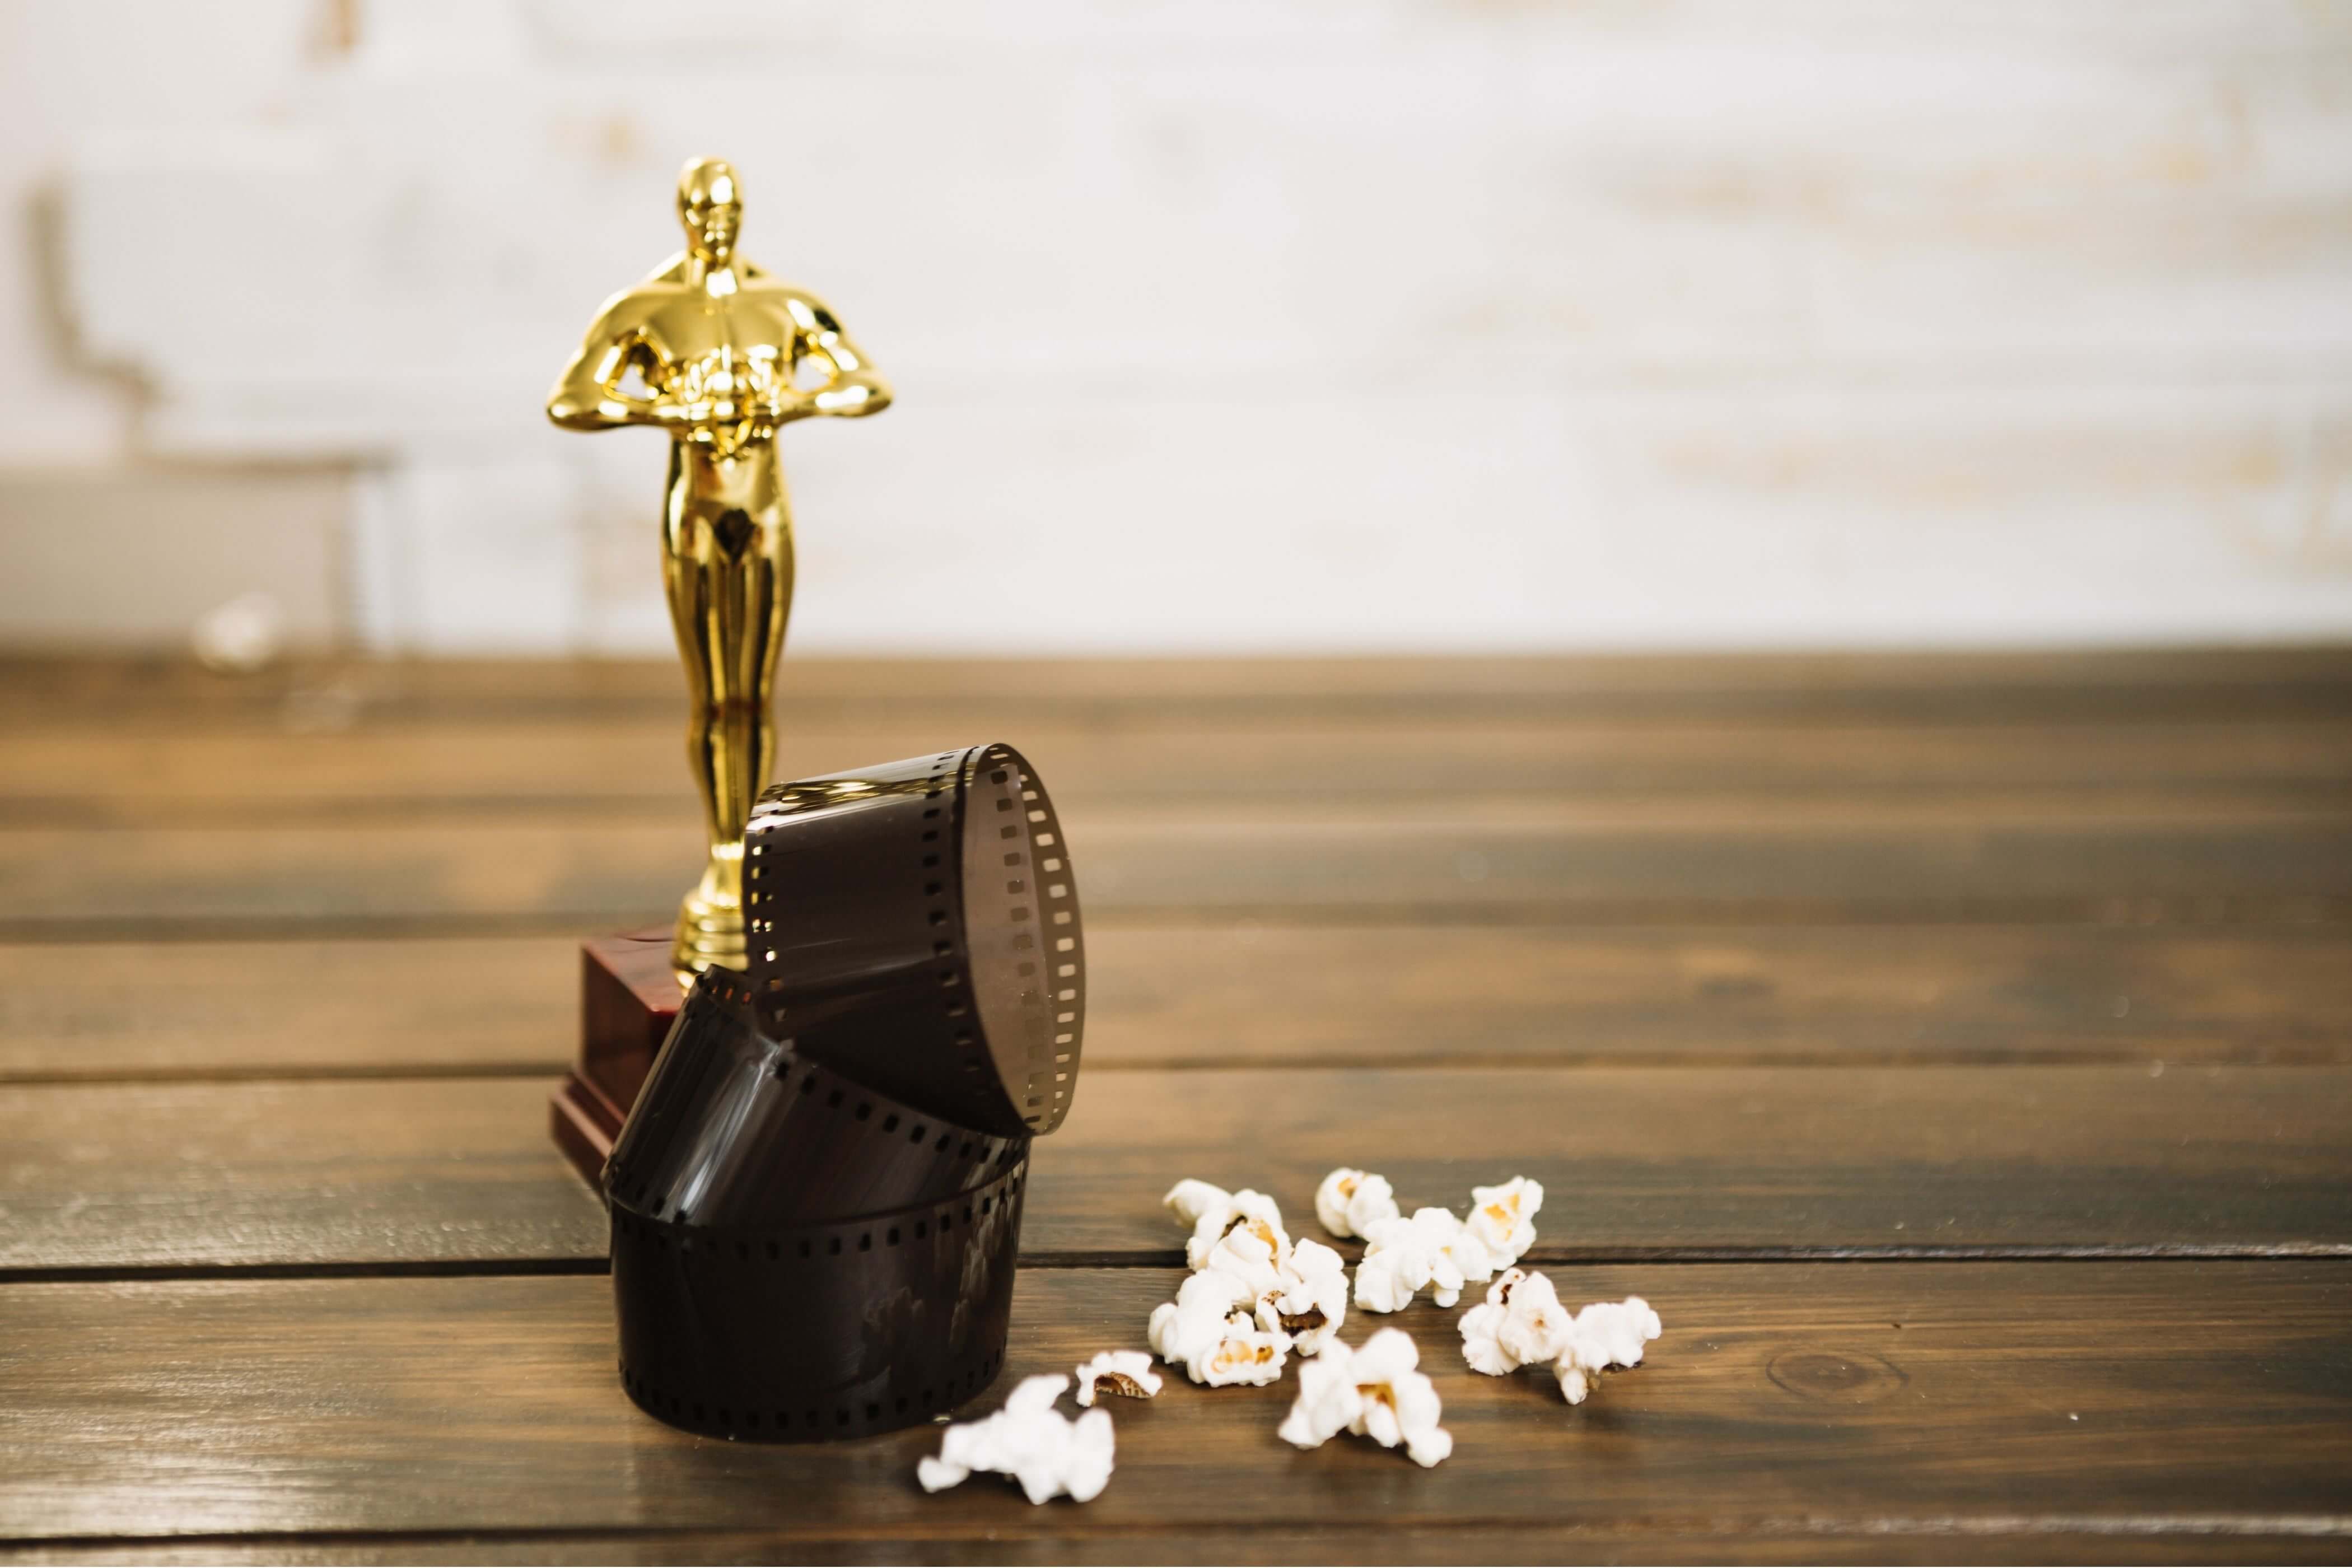 An Oscar movie award with a film reel and spilled popcorn.